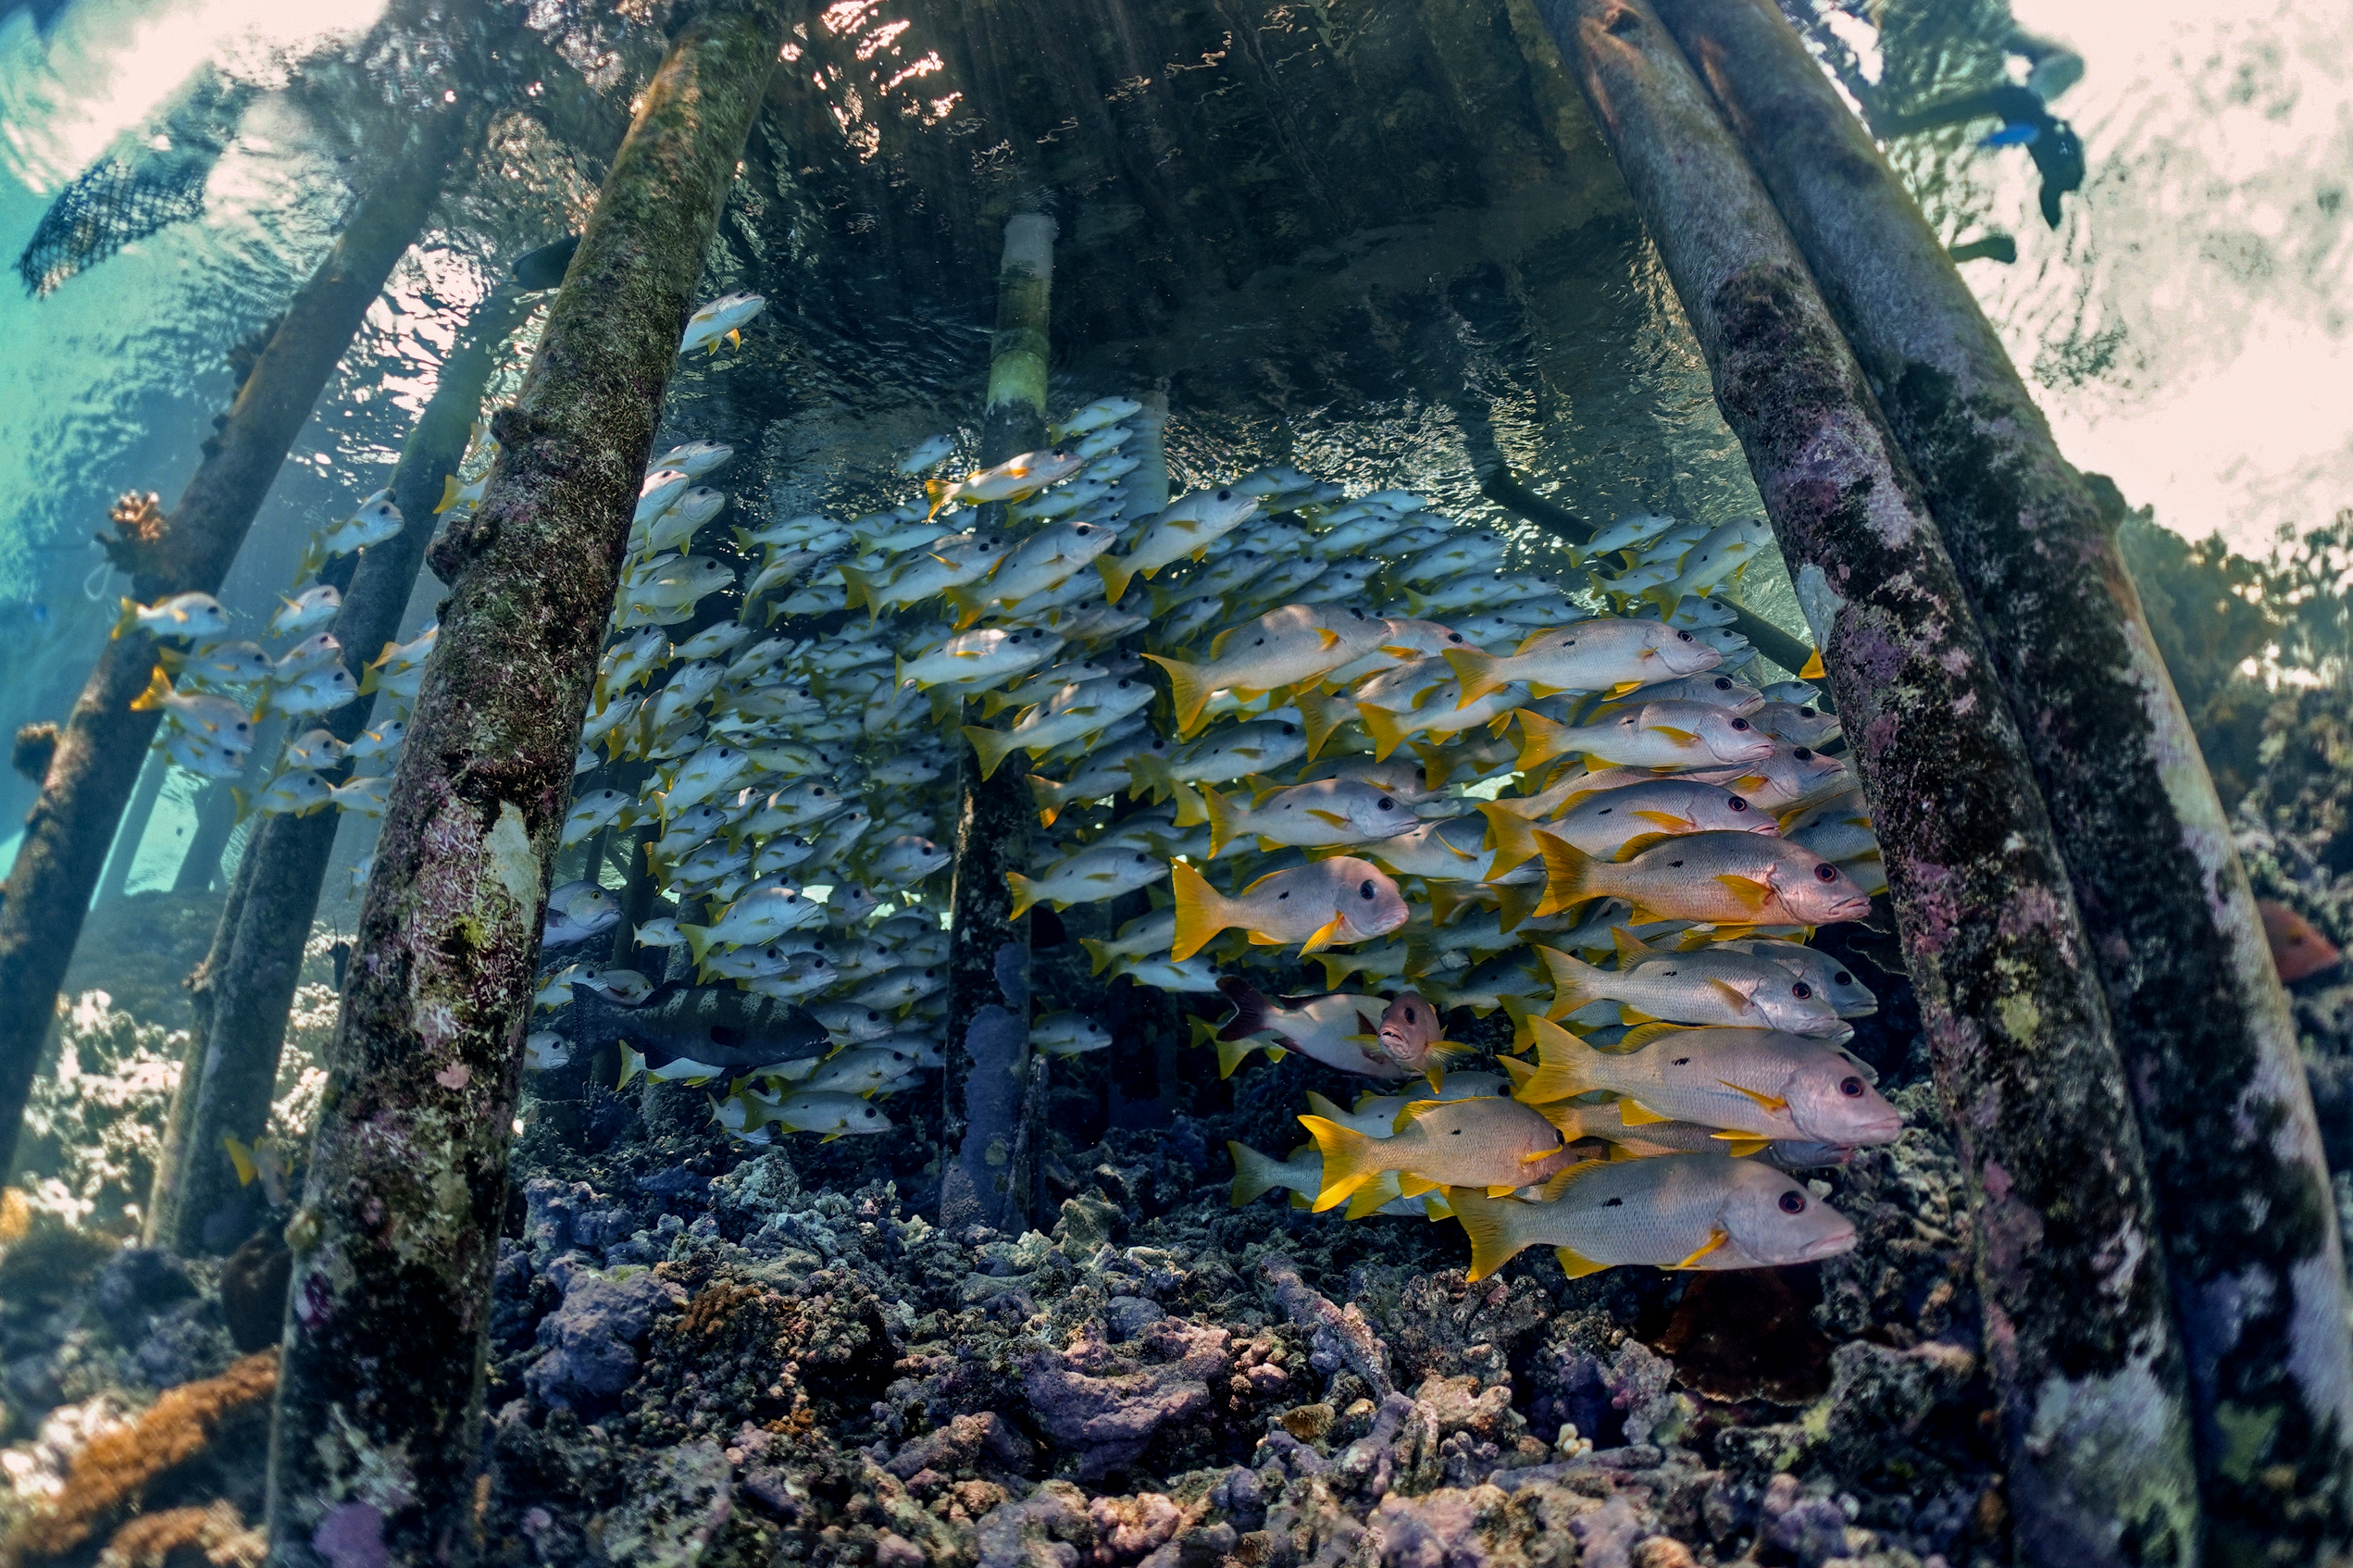 School of one-spot snappers under the pontoon at Tumakohua. Photo by Pierre Constant.